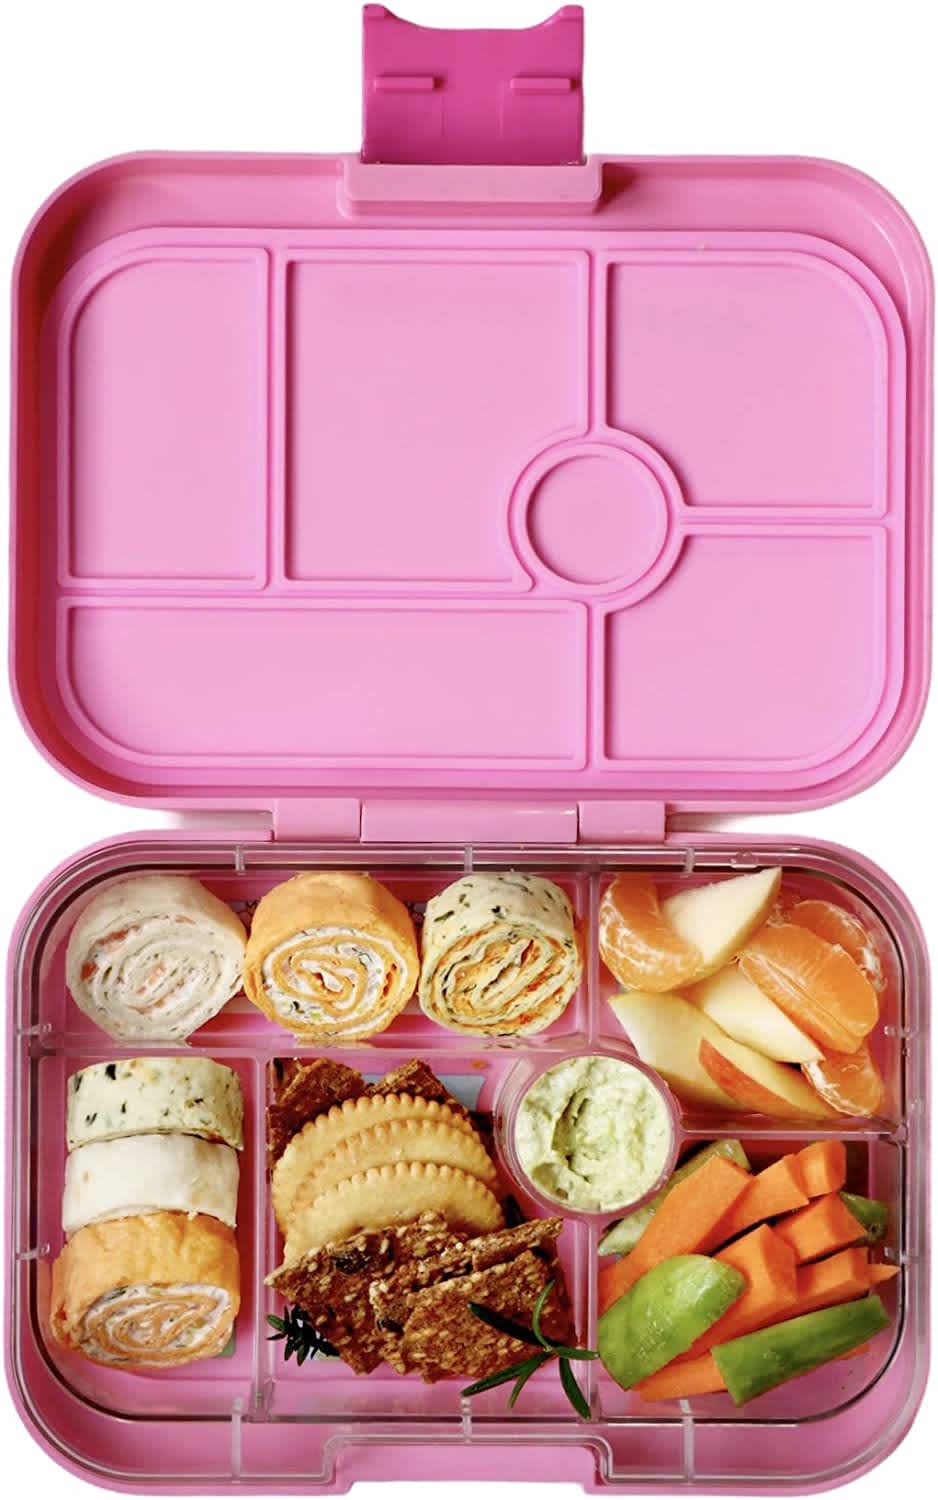 Bento School Lunches : Review: Easy LunchBox and Scooby-Doo Bento Lunch